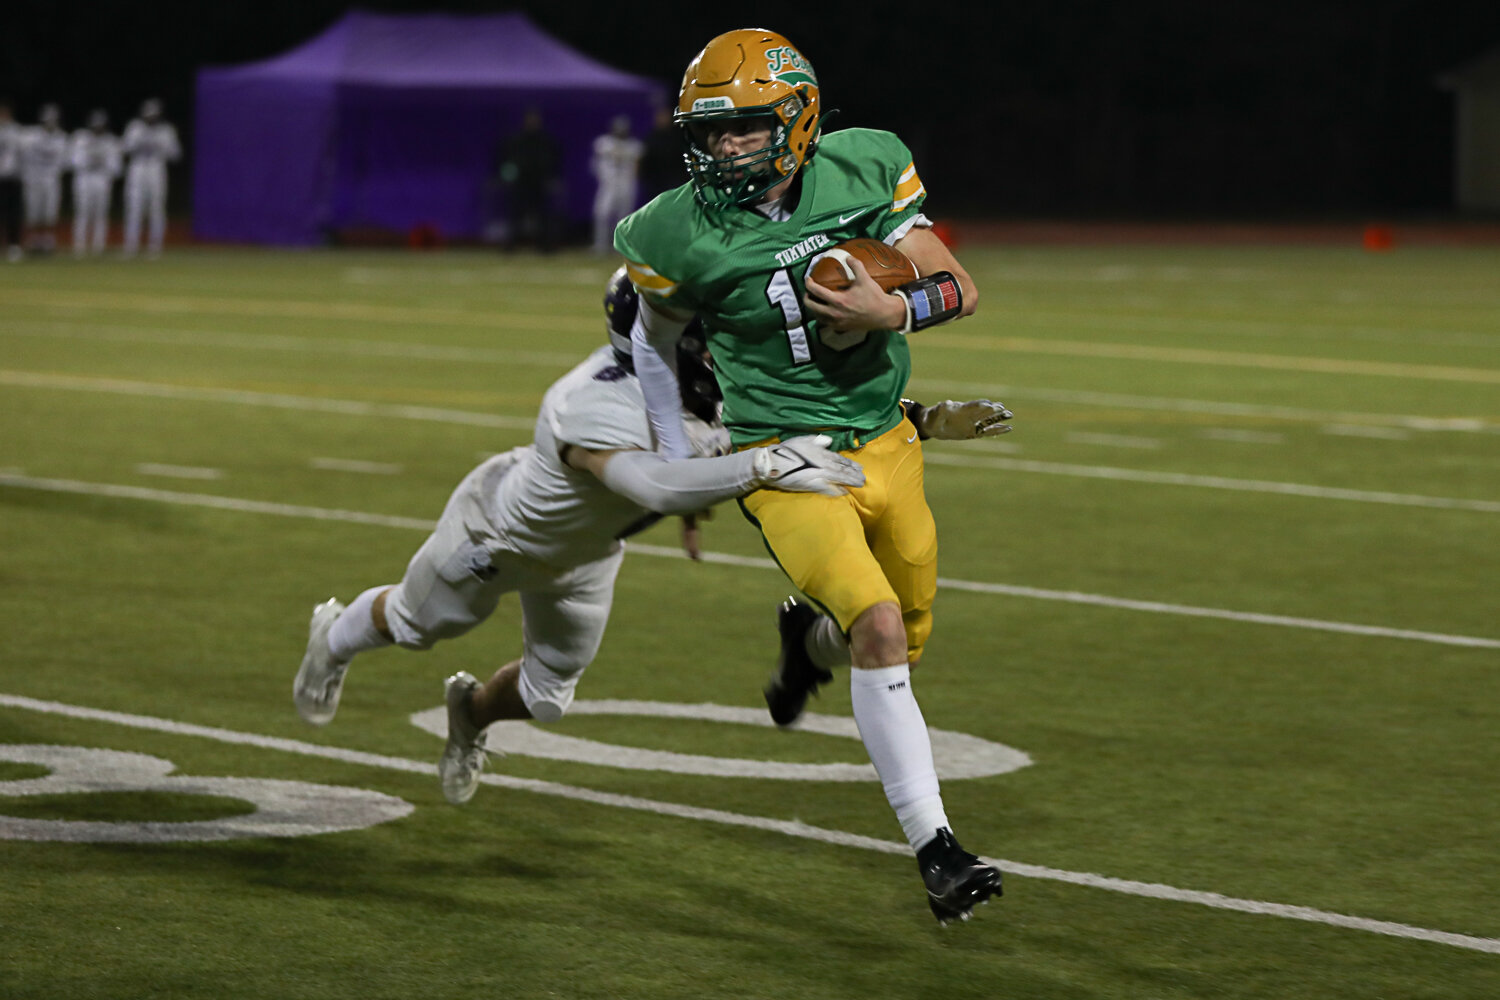 Tumwater's Ethan Kastner rushes downfield during a 19-17 win over North Kitsap Nov. 25.